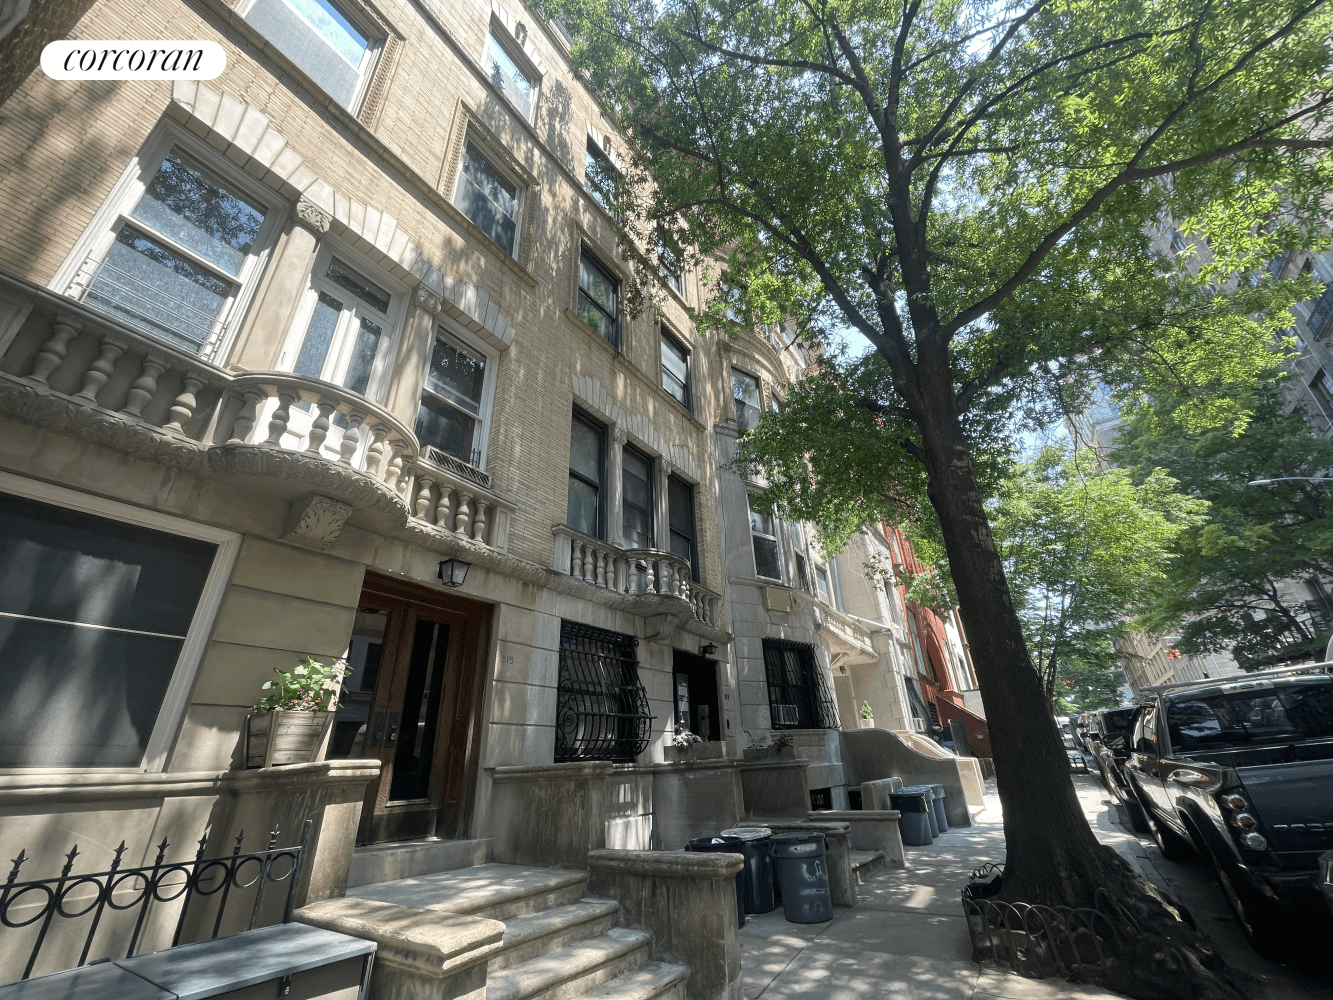 Welcome to 313 West 78th Street your tranquil 1 bedroom apartment nestled in a quiet and serene townhouse in the heart of the Upper West Side.